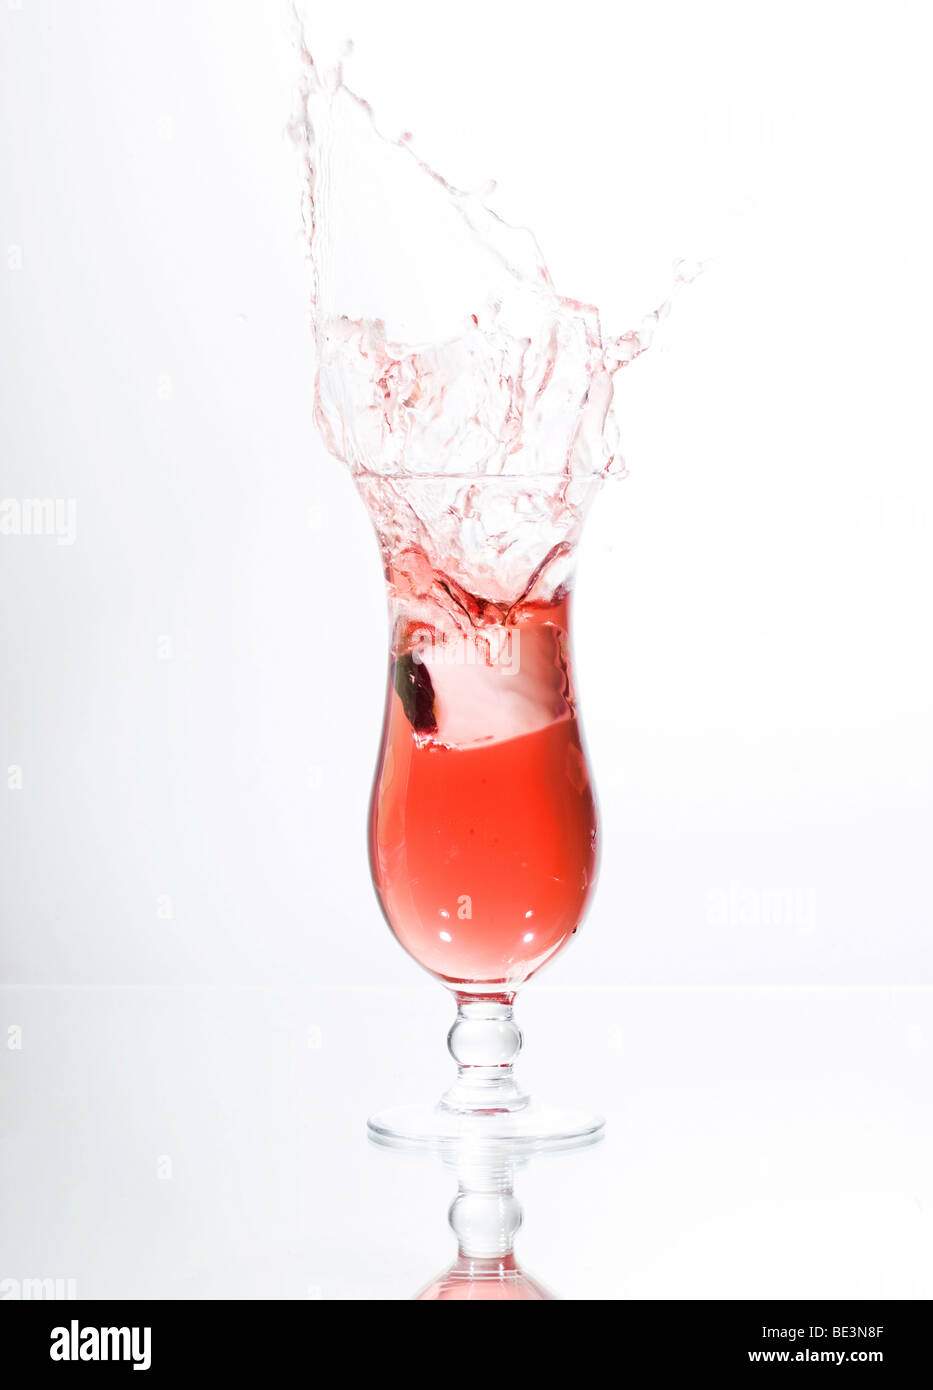 Ice cube falling into a glass of red liquid, juice, cocktail Stock Photo